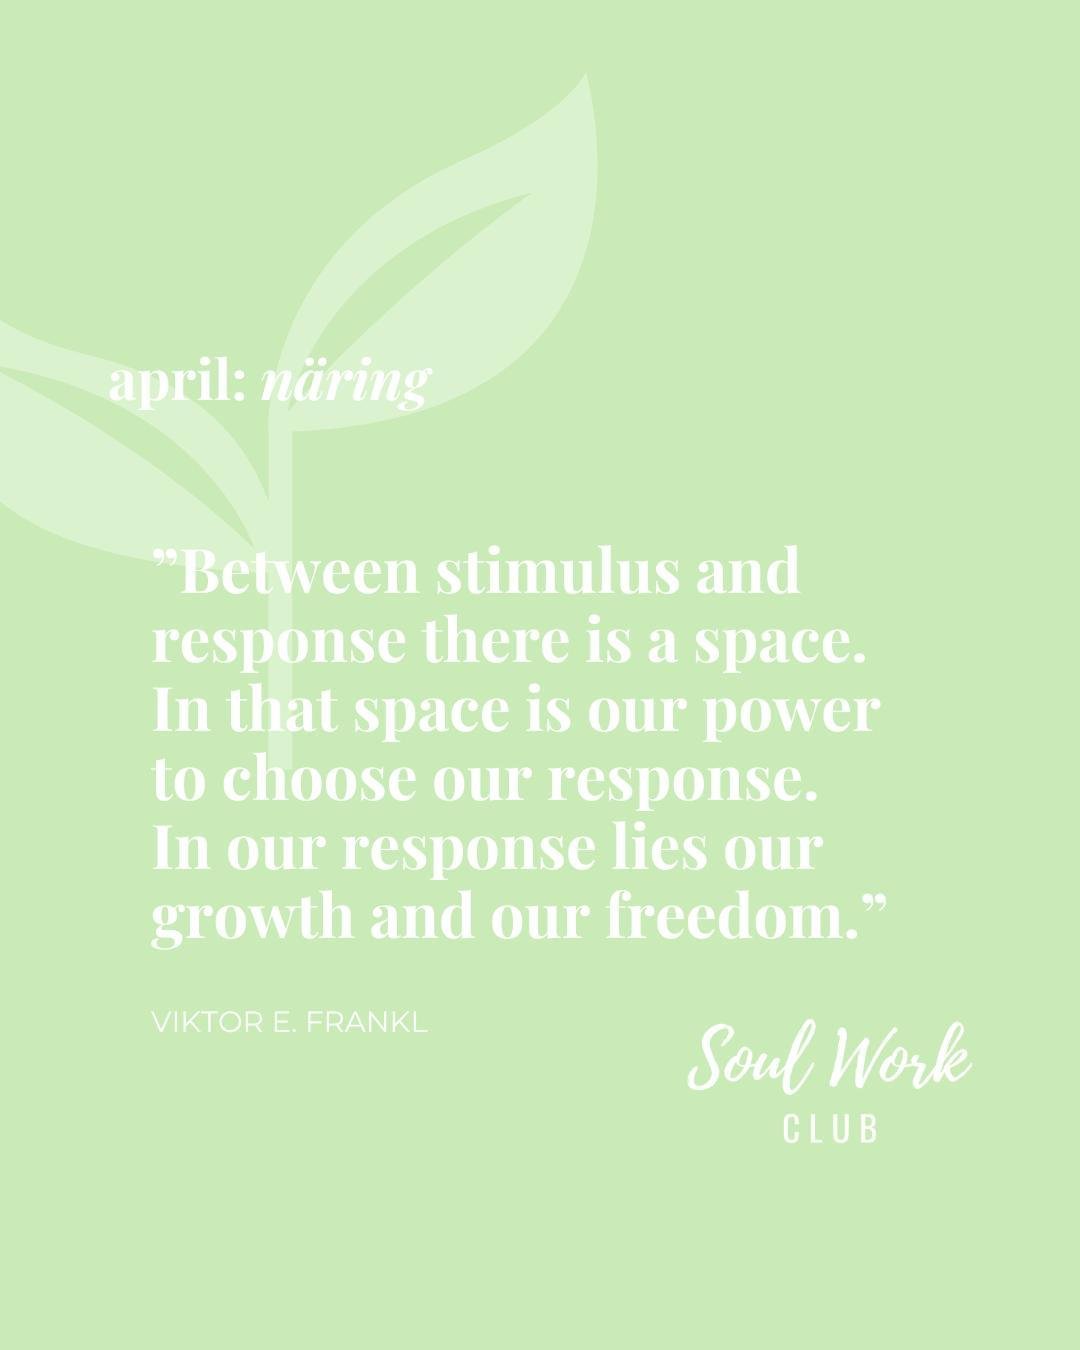 &rdquo;Between stimulus and response there is a space. ⁠
In that space is our power ⁠
to choose our response. ⁠
In our response lies our growth and our freedom.&rdquo;⁠
&ndash; Viktor E. Frankl⁠
⁠
S&ouml;ndagar i klubben &auml;r f&ouml;r SoulSurfing: